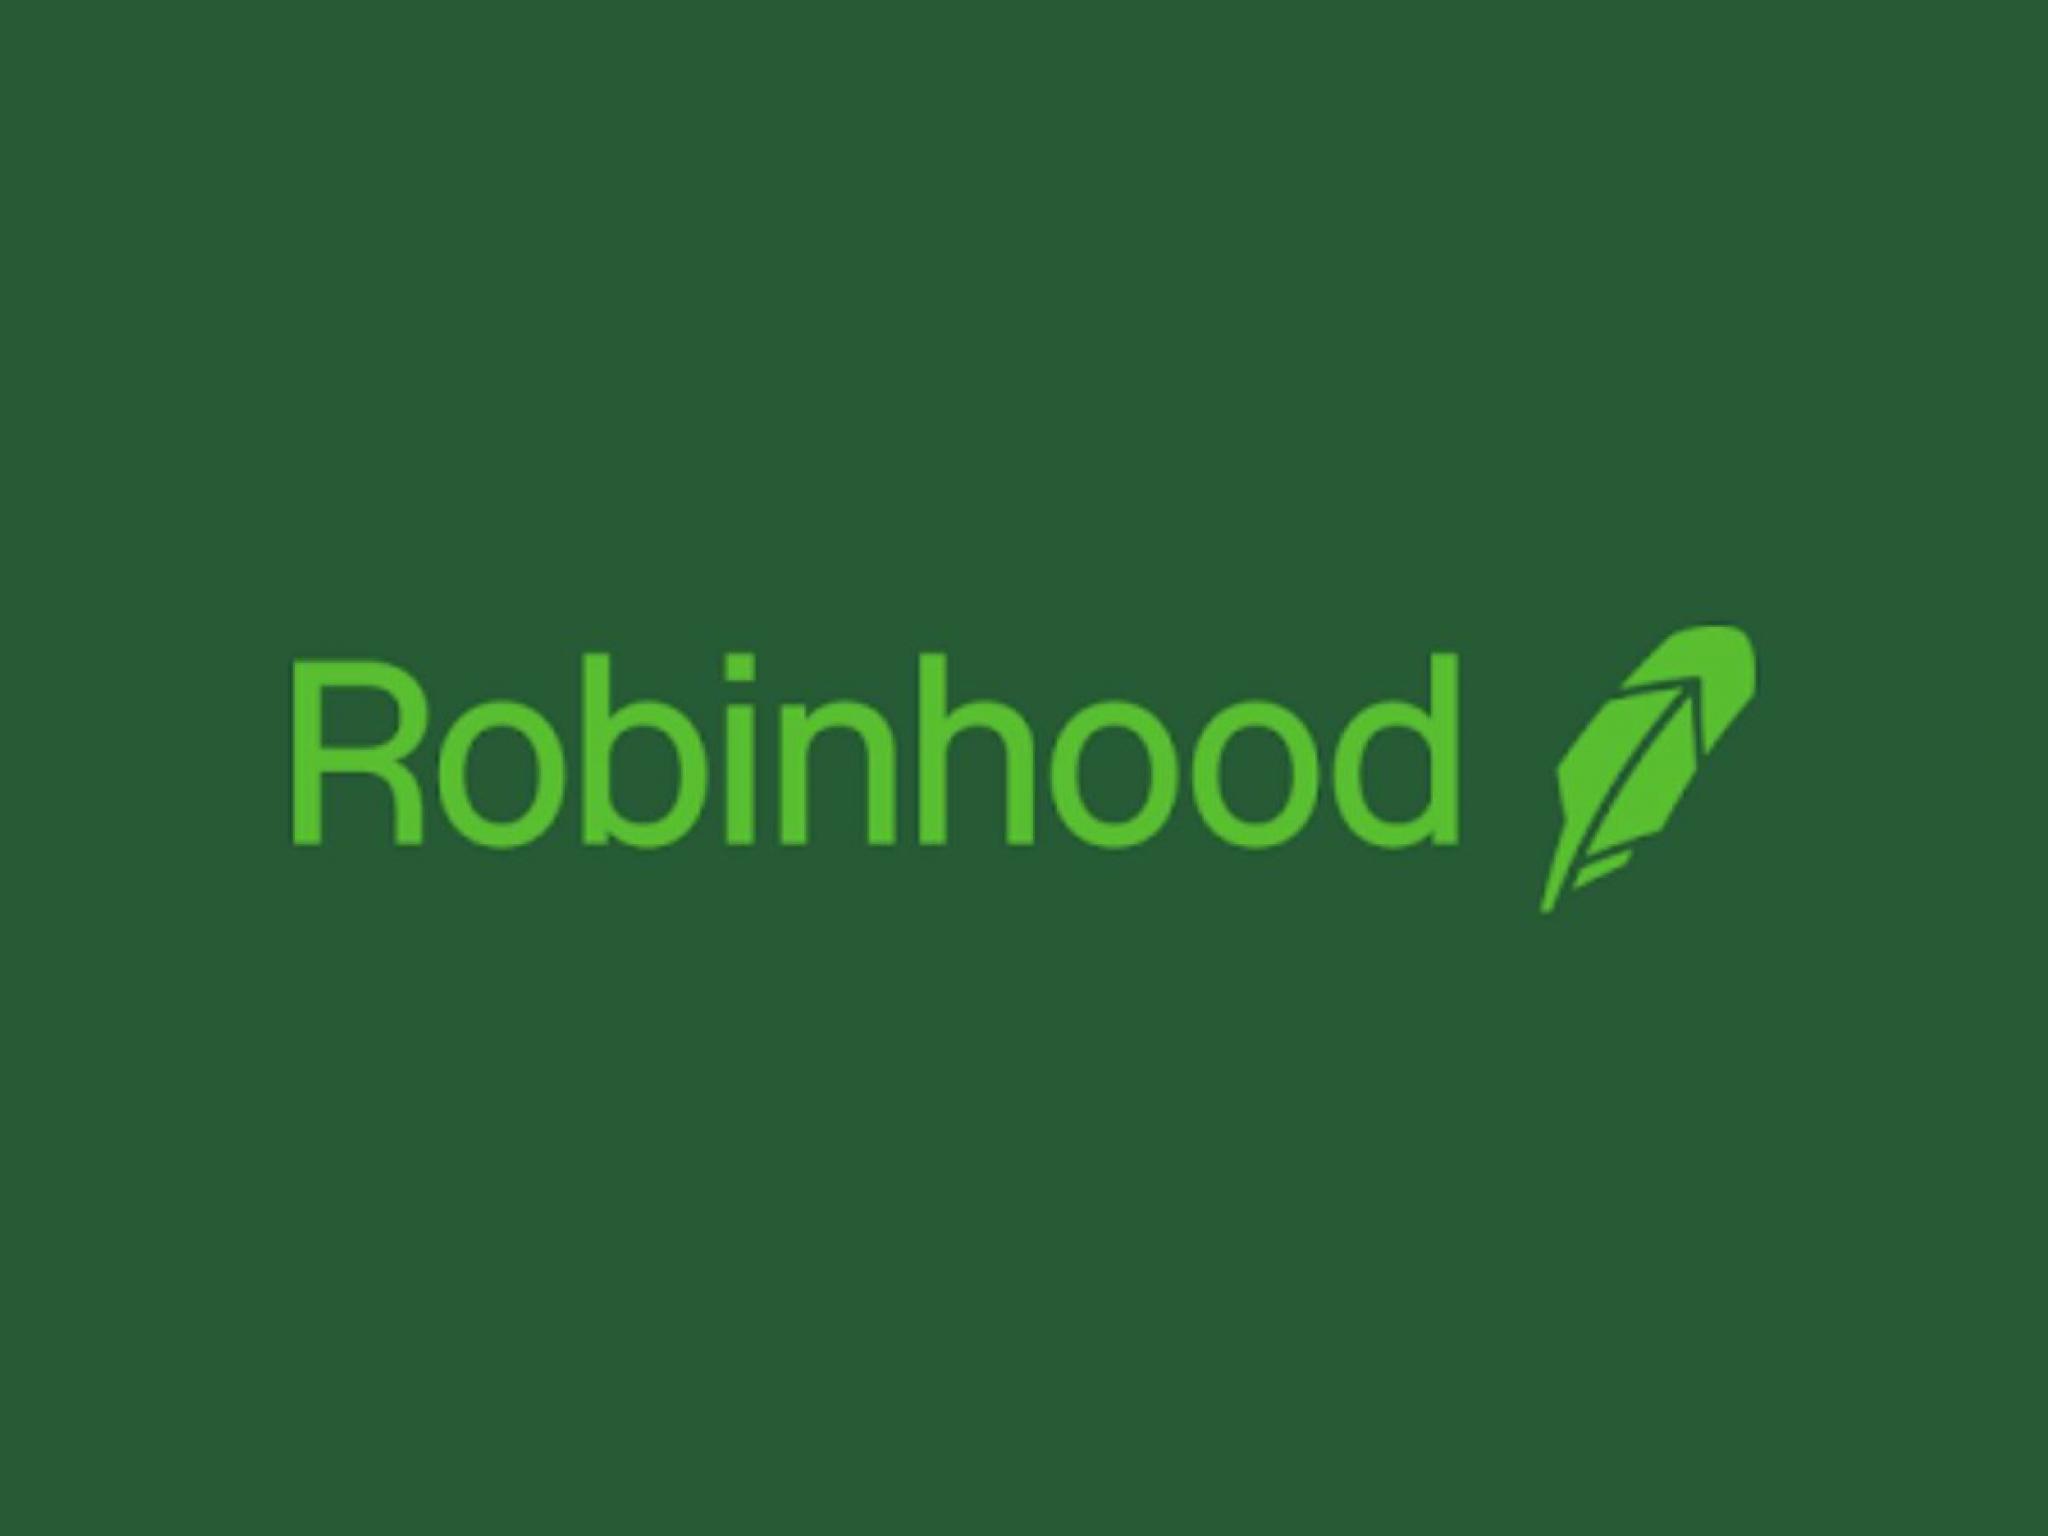  robinhood-to-rally-around-10-here-are-10-top-analyst-forecasts-for-thursday 